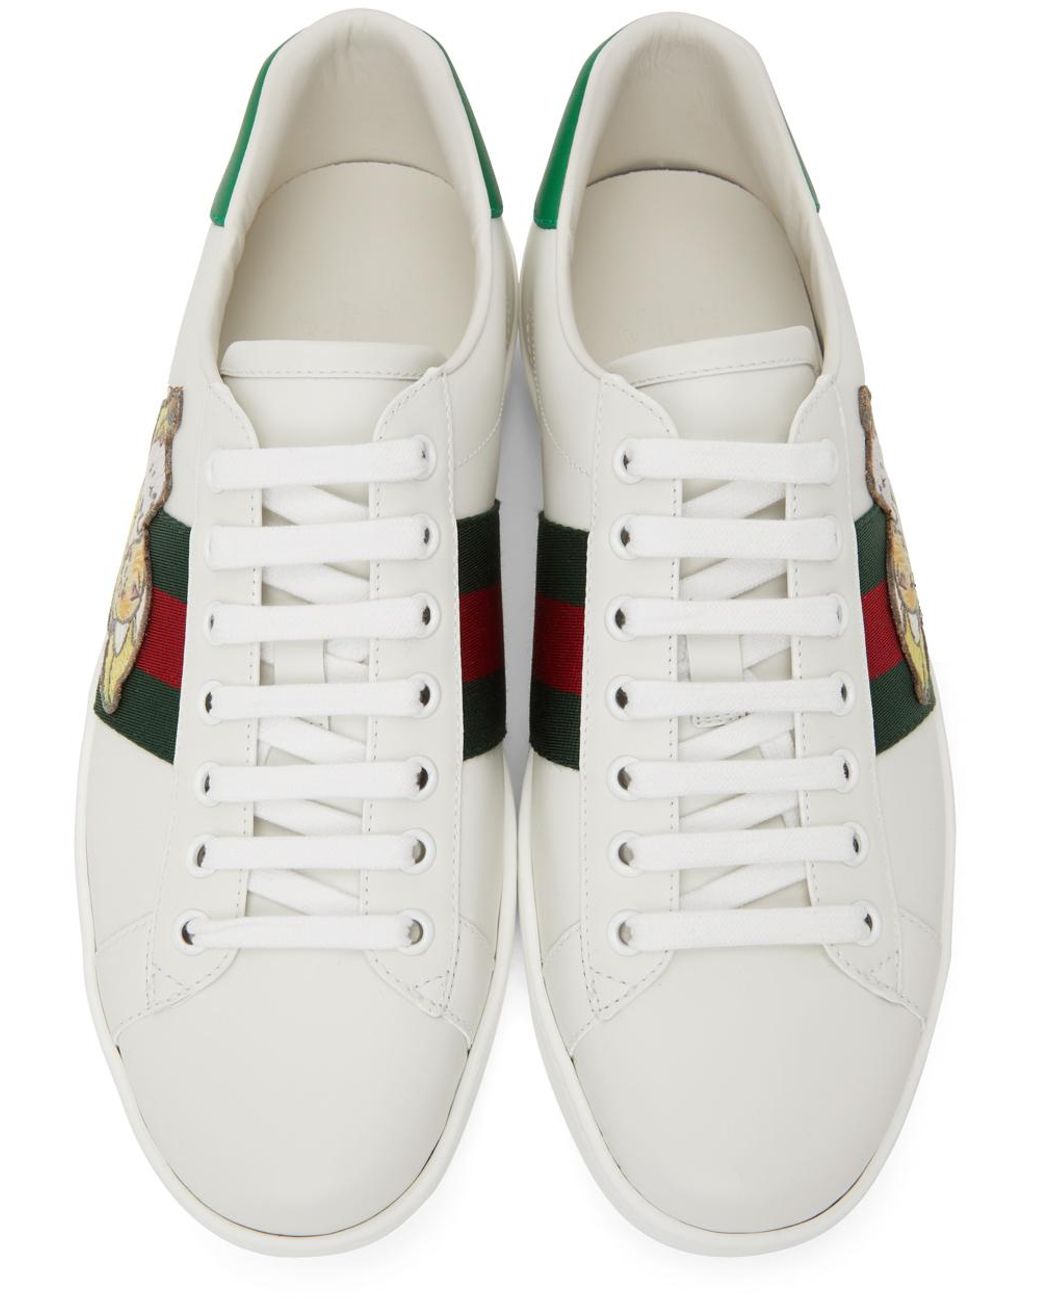 Gucci Leather Bananya Ace Sneaker in White for Men - Save 6% | Lyst